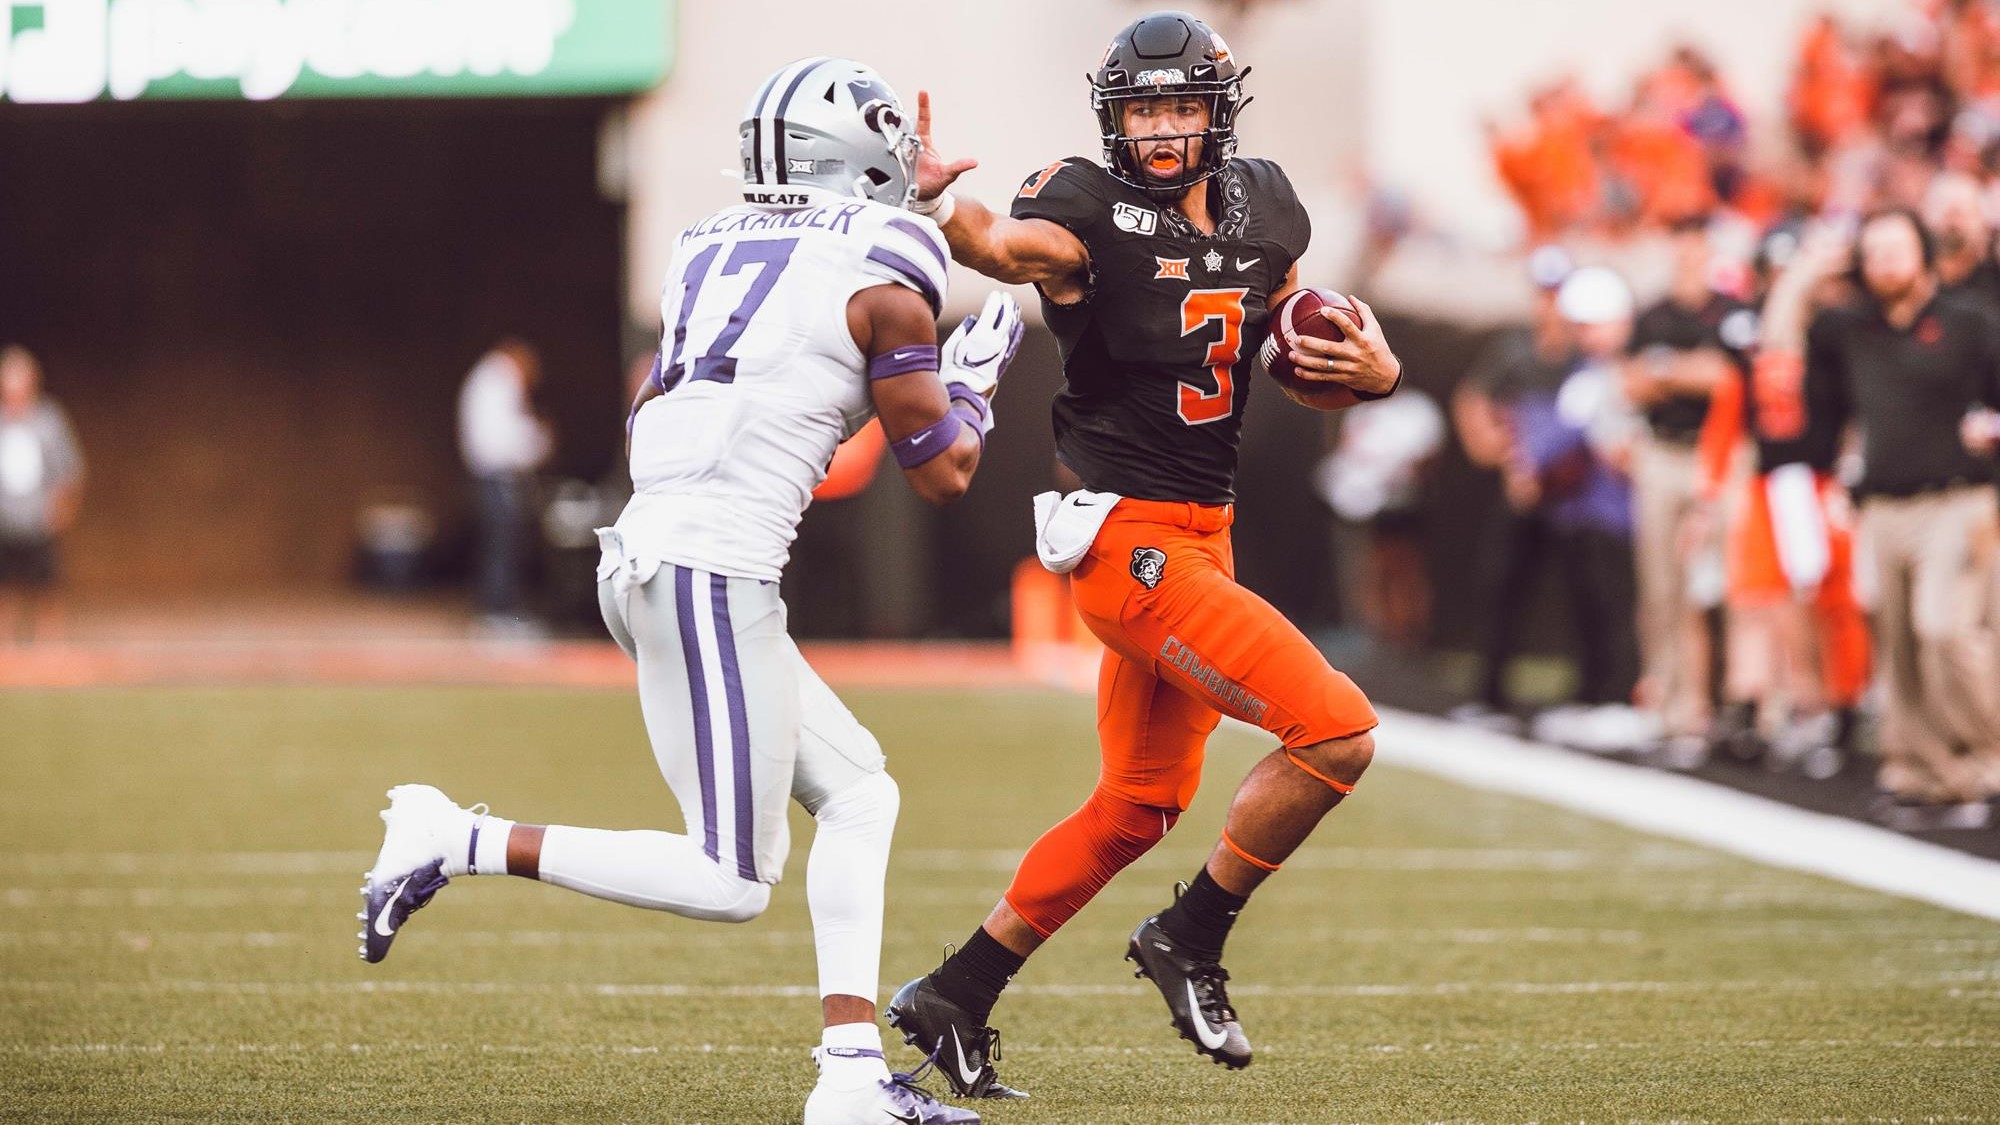 Sanders ready to lead Oklahoma State to new heights